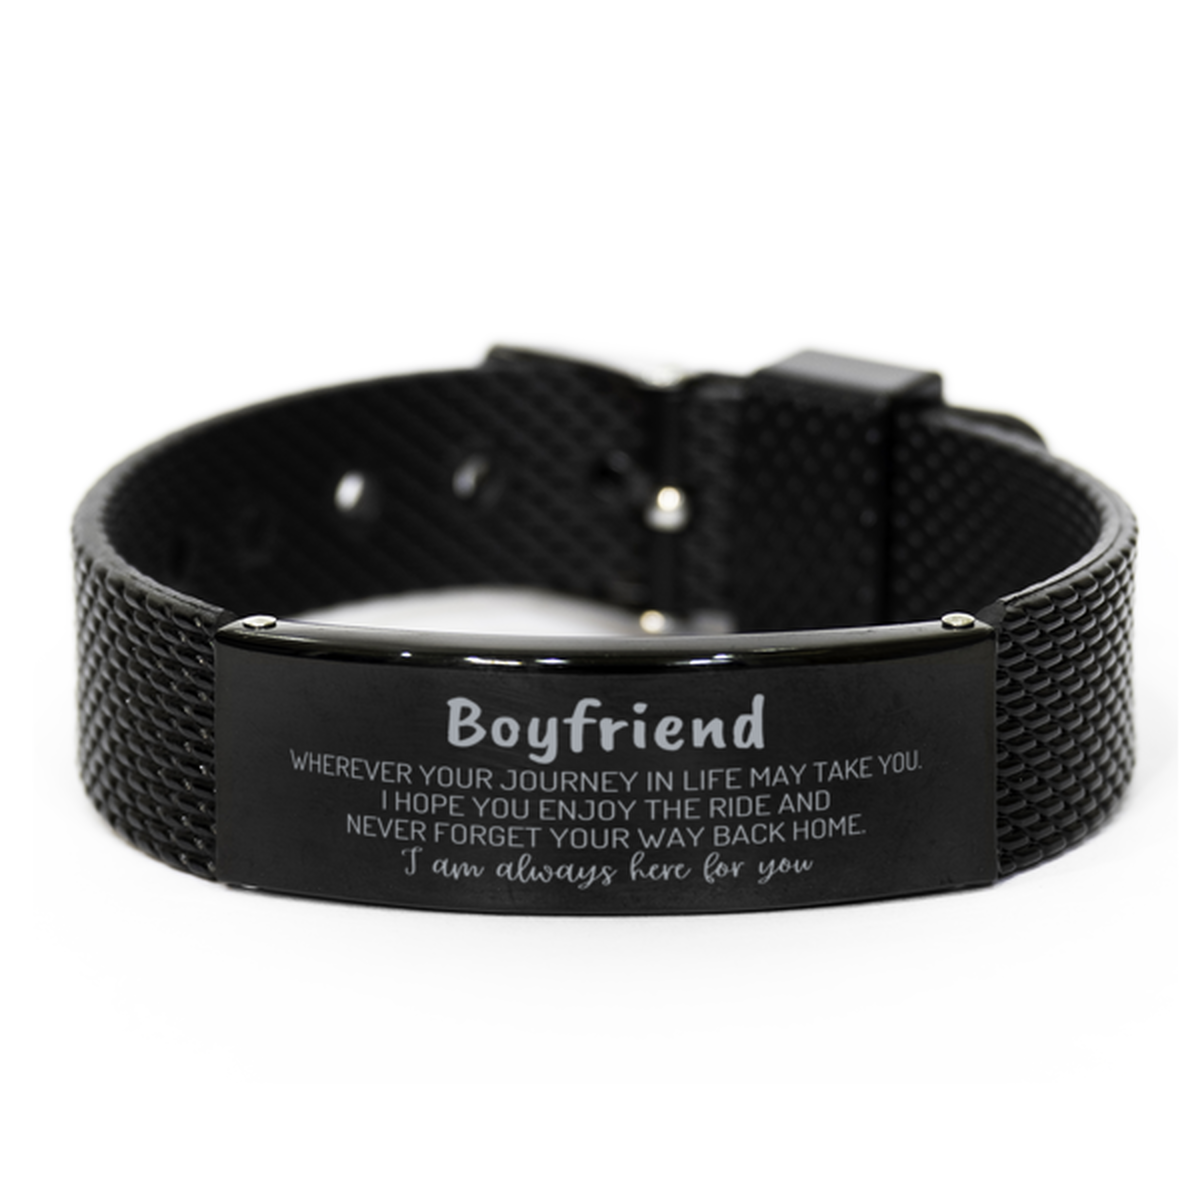 Boyfriend wherever your journey in life may take you, I am always here for you Boyfriend Black Shark Mesh Bracelet, Awesome Christmas Gifts For Boyfriend, Boyfriend Birthday Gifts for Men Women Family Loved One